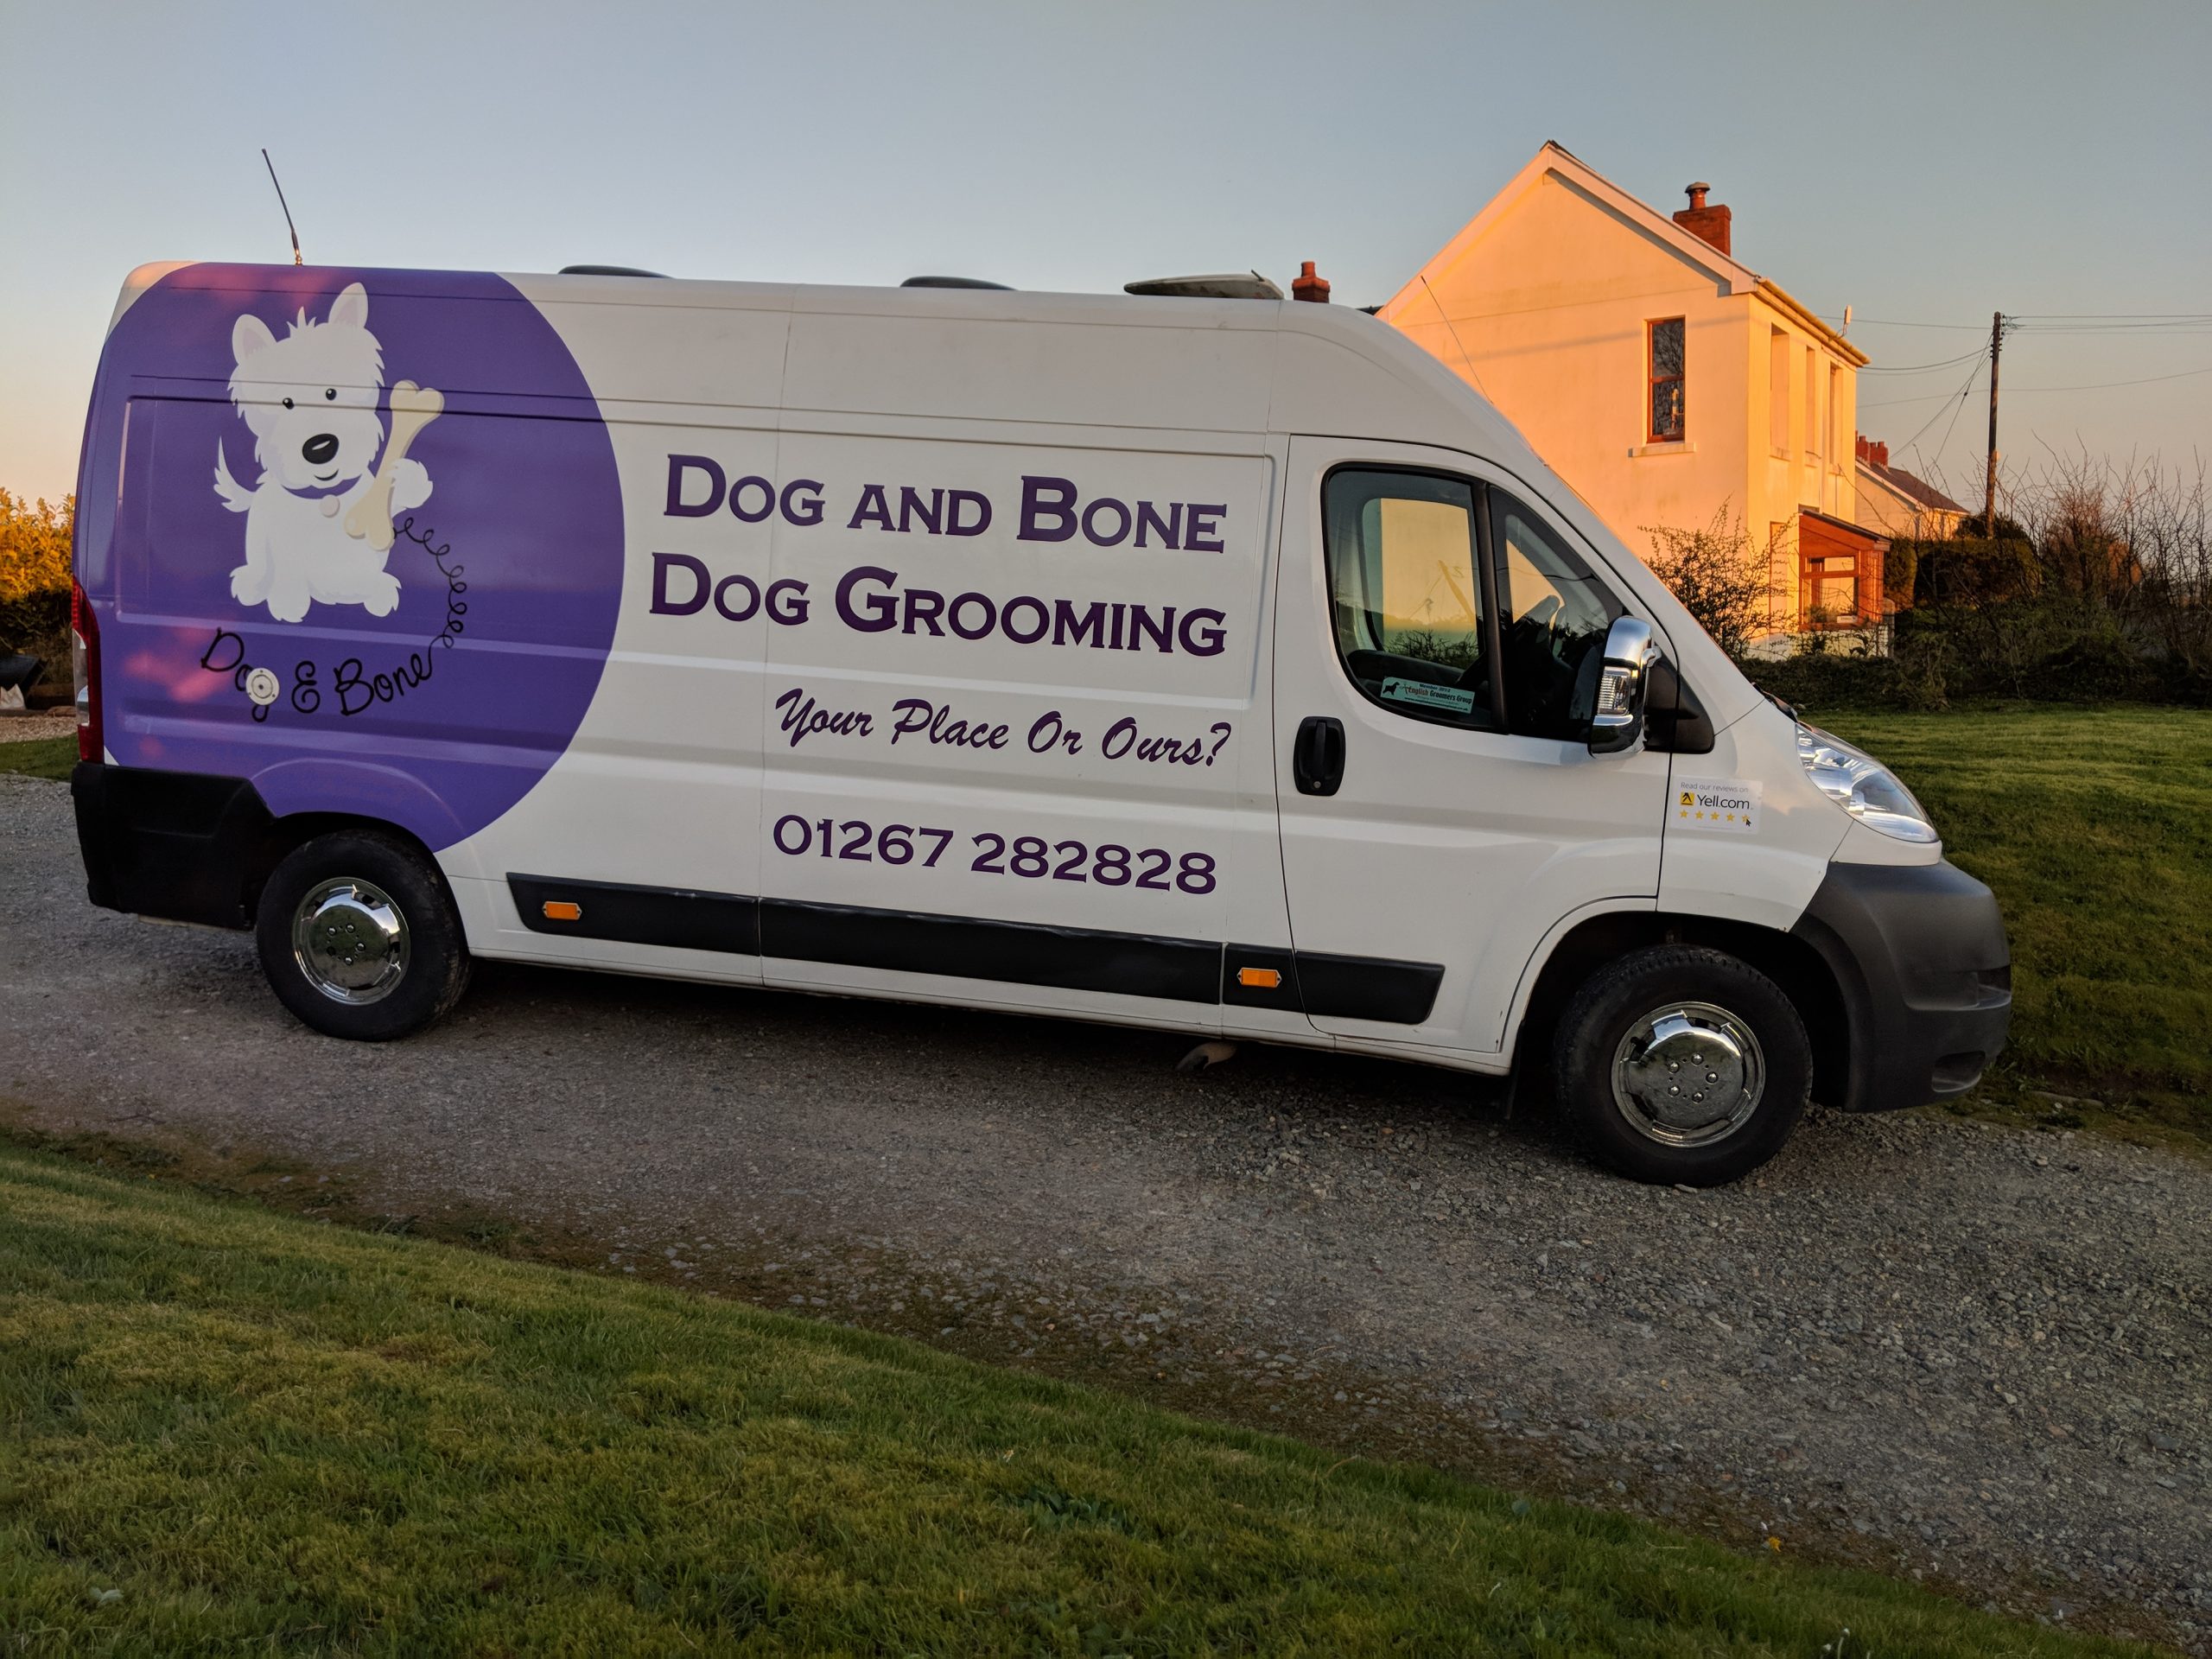 Mobile Dog Grooming Franchise Dog and Bone Dog Grooming